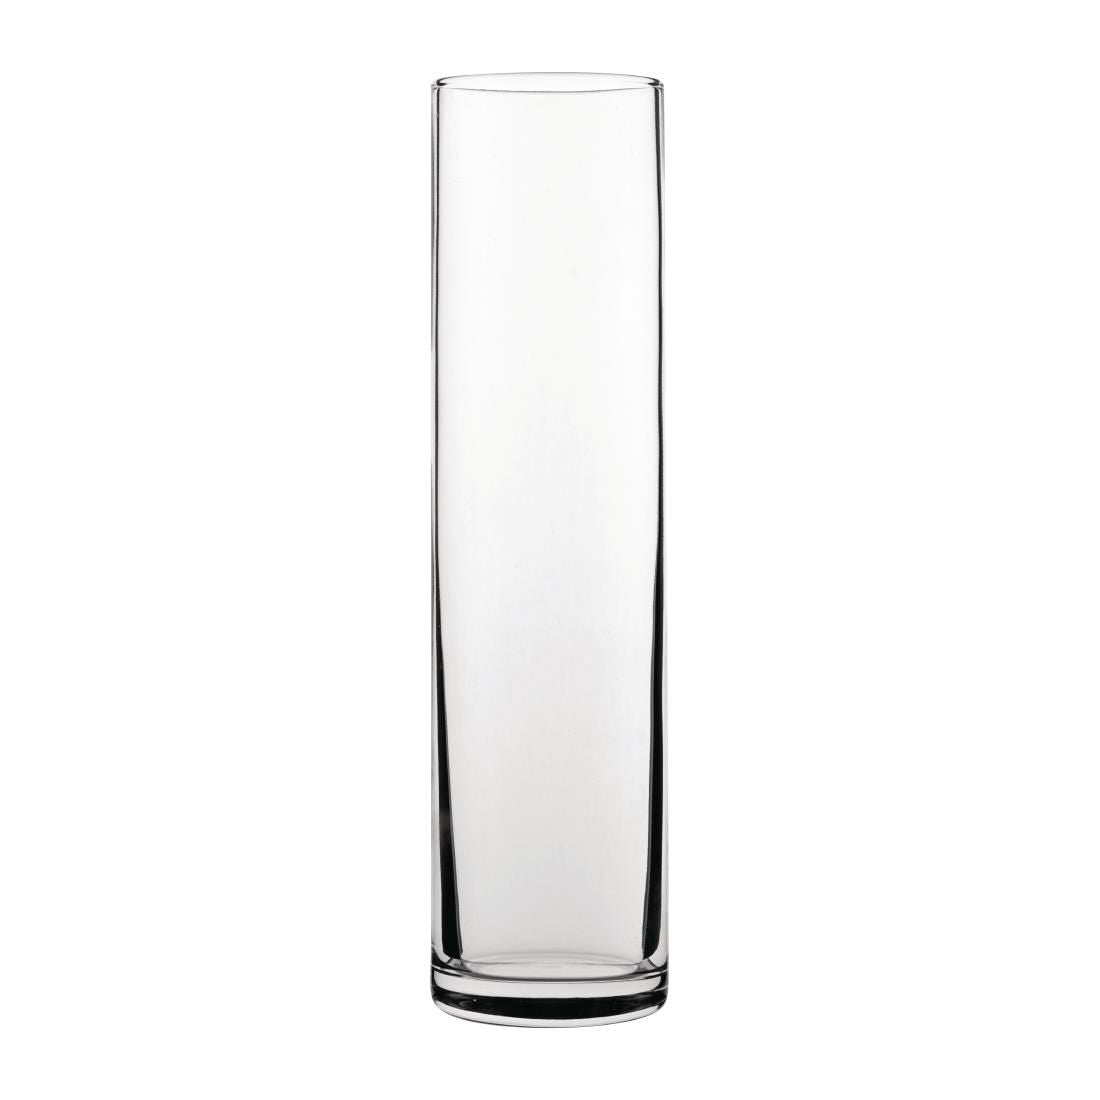 CW079 Utopia Tall Cocktail Glasses 370ml (Pack of 24) JD Catering Equipment Solutions Ltd